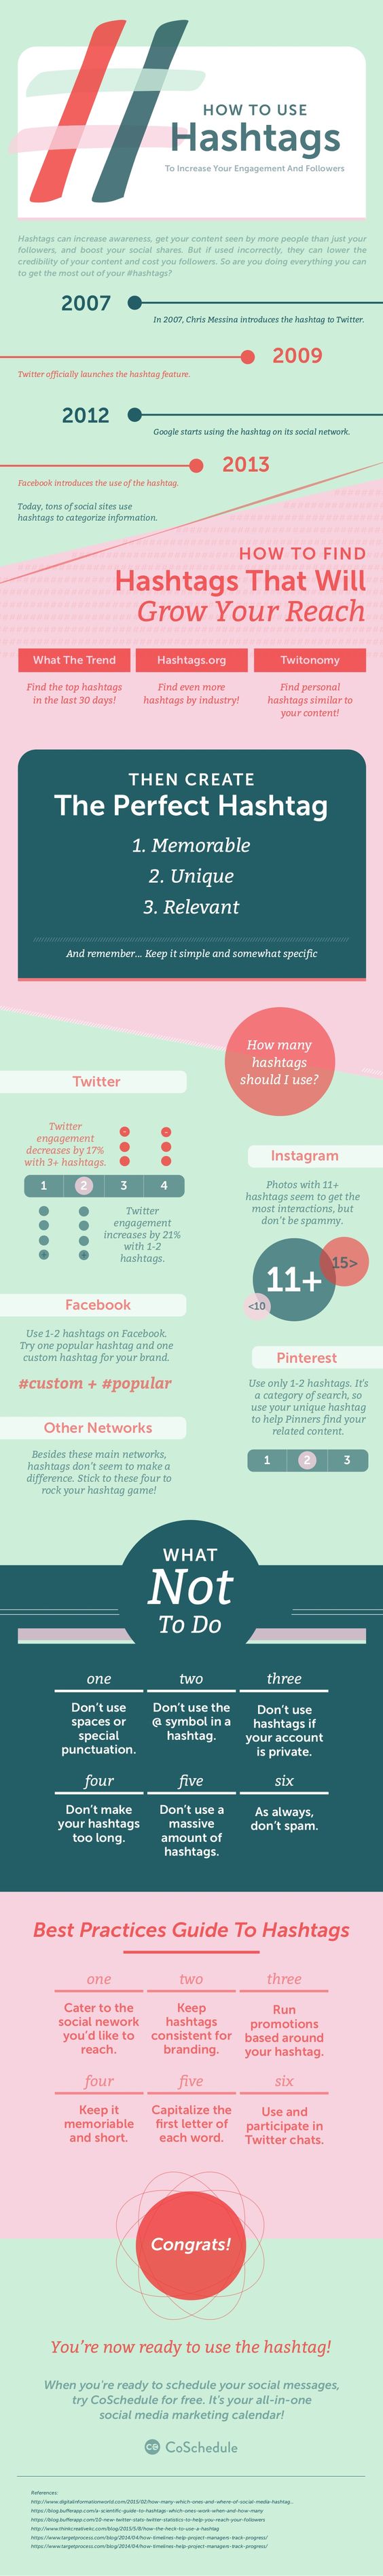 #SocialMedia Tips: How To Use Hashtags To Increase Your Engagement And Followers. #Web #Marketing #Business #Entrepreneur #Startup #Content #Digital